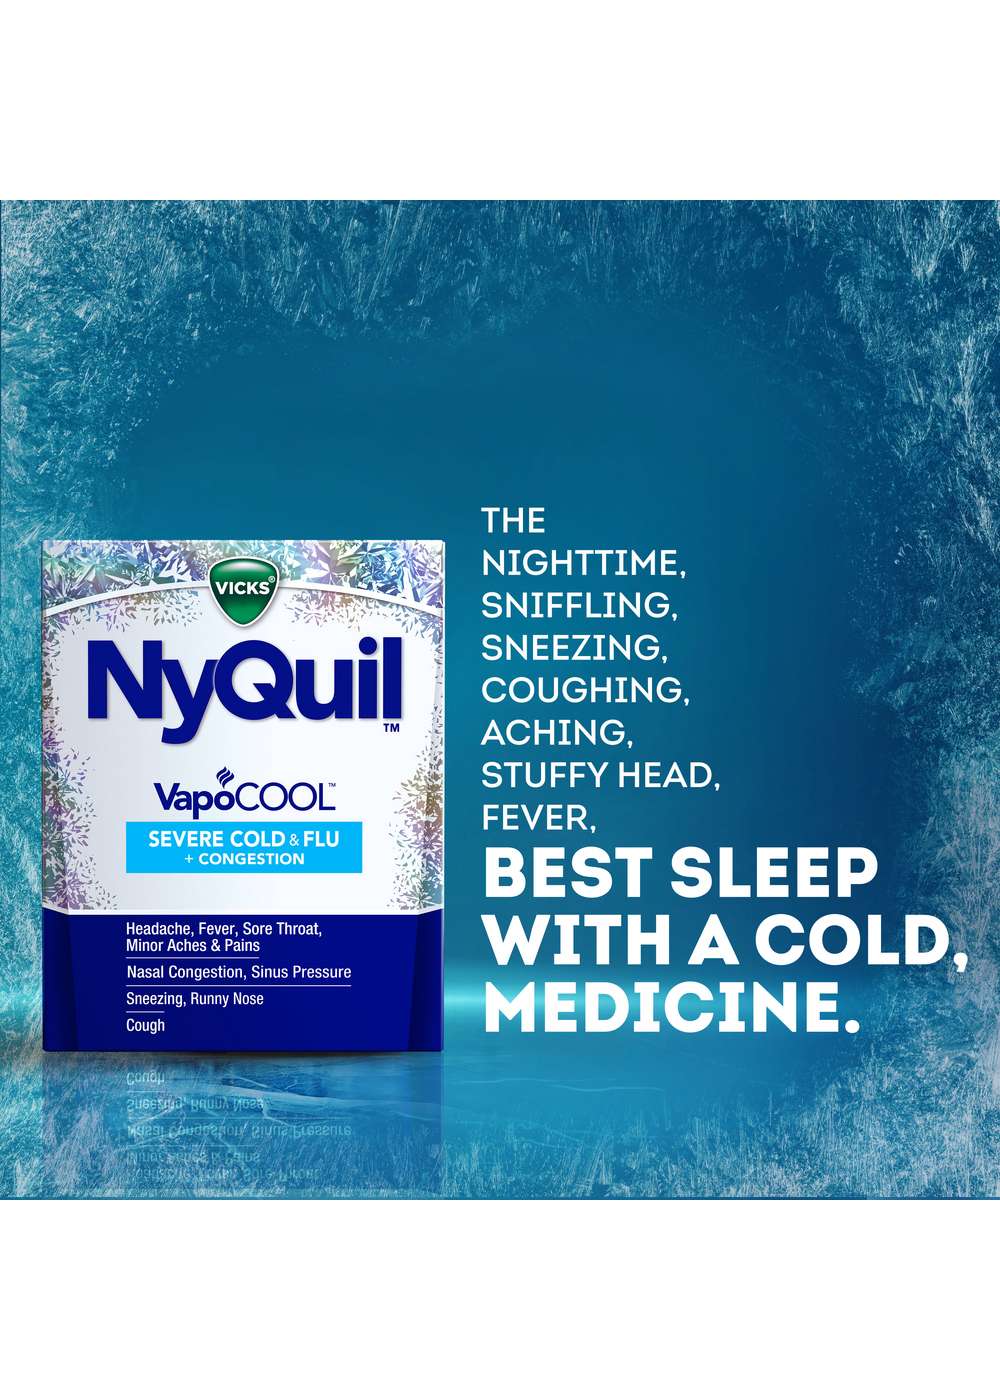 Vicks DayQuil + NyQuil VapoCOOL SEVERE  Cold & Flu + Congestion Combo Pack; image 8 of 8